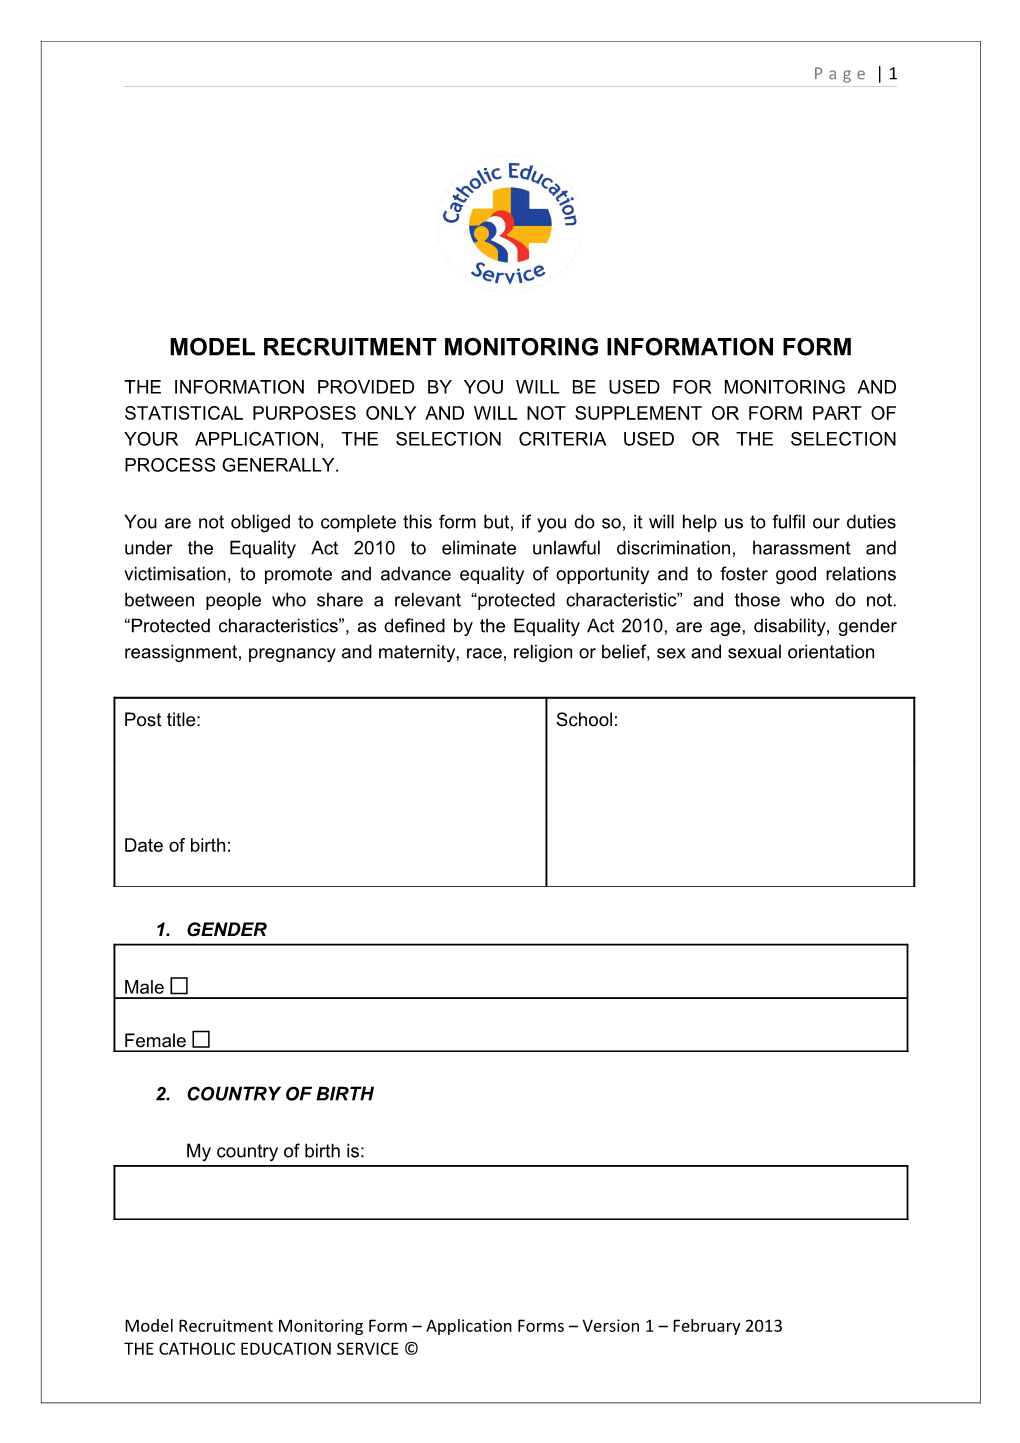 Model Recruitment Monitoring Information Form s2